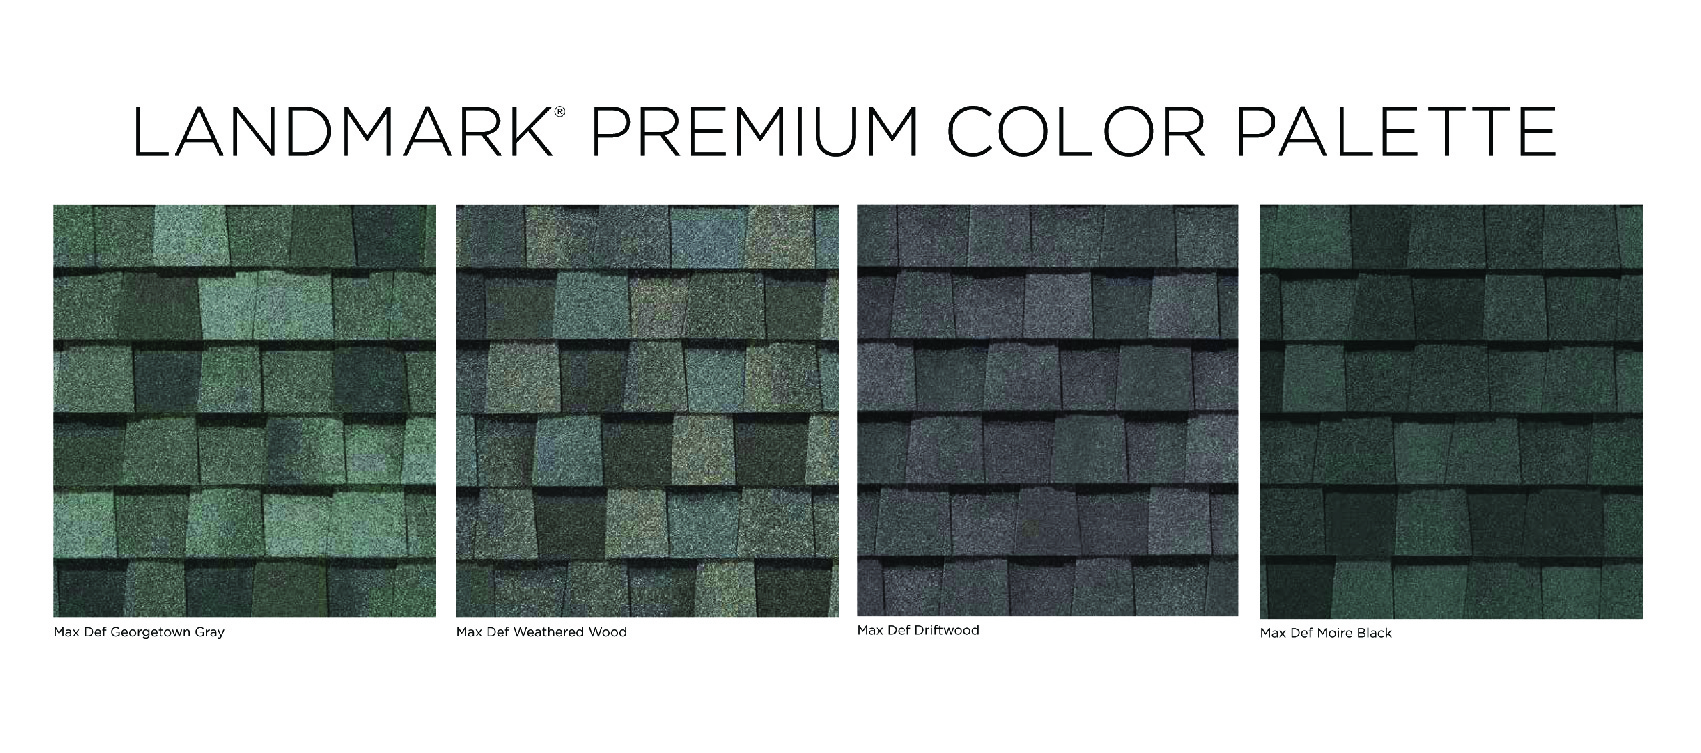 four different shades of green shingles are shown under the words landmark premium color palette